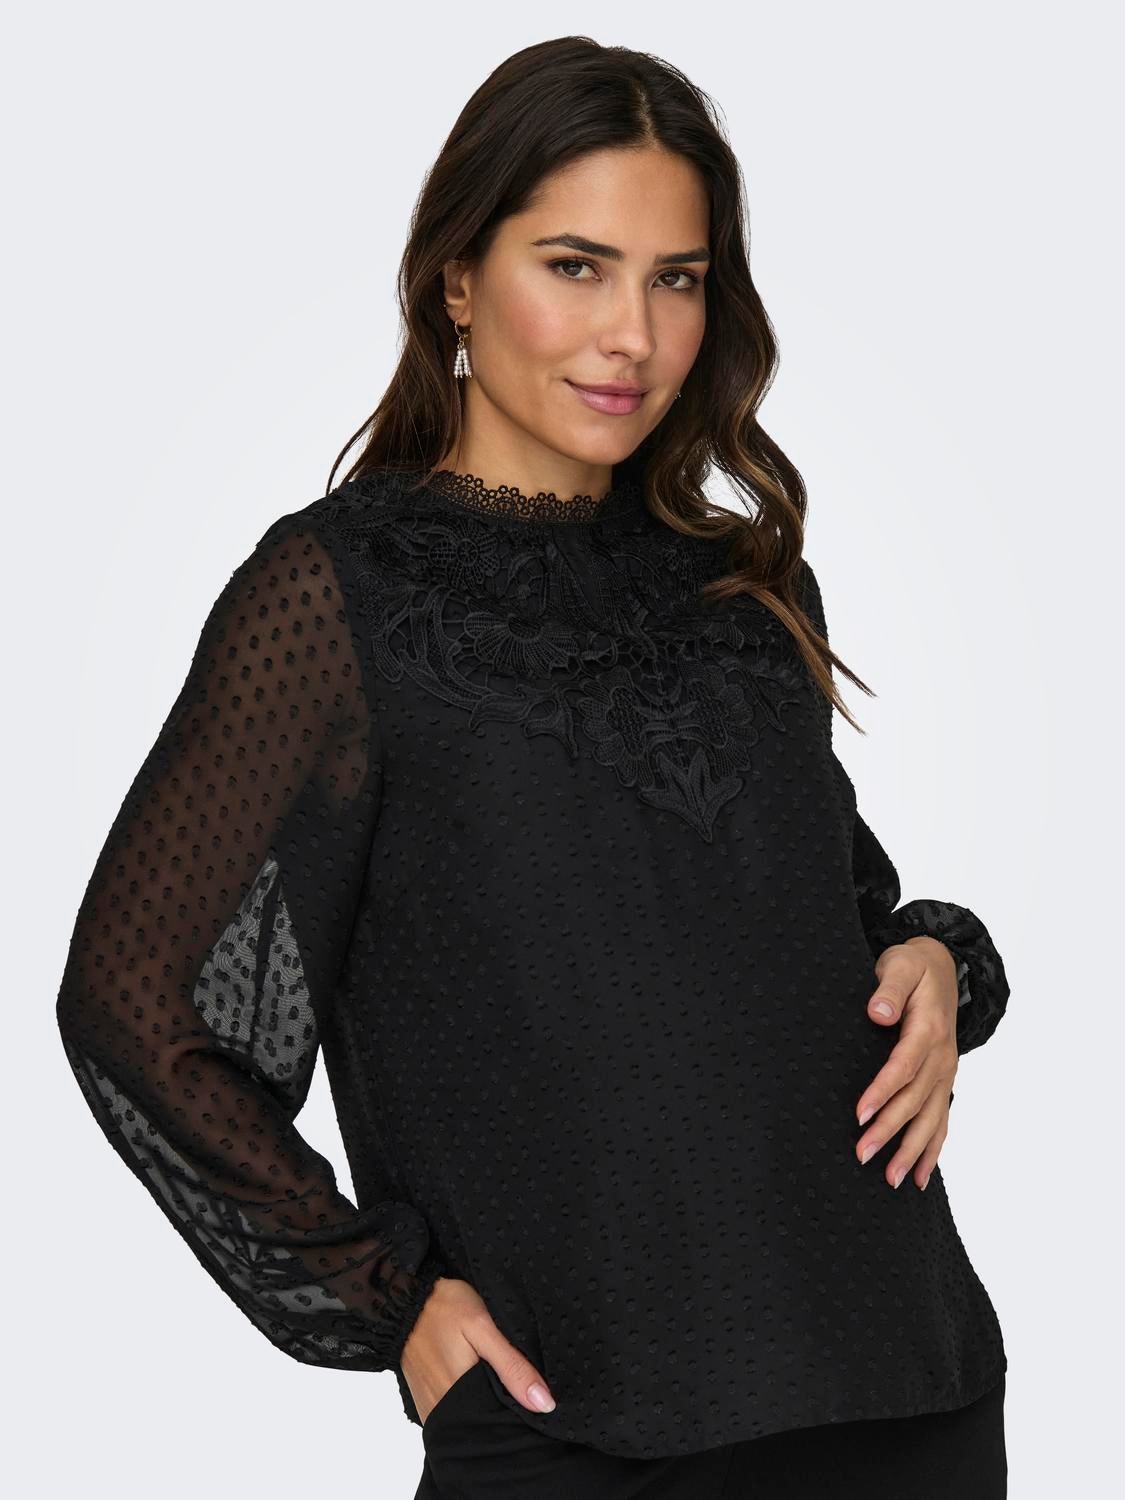 ONLY Mama 2-layer lace top -Black - 15326250